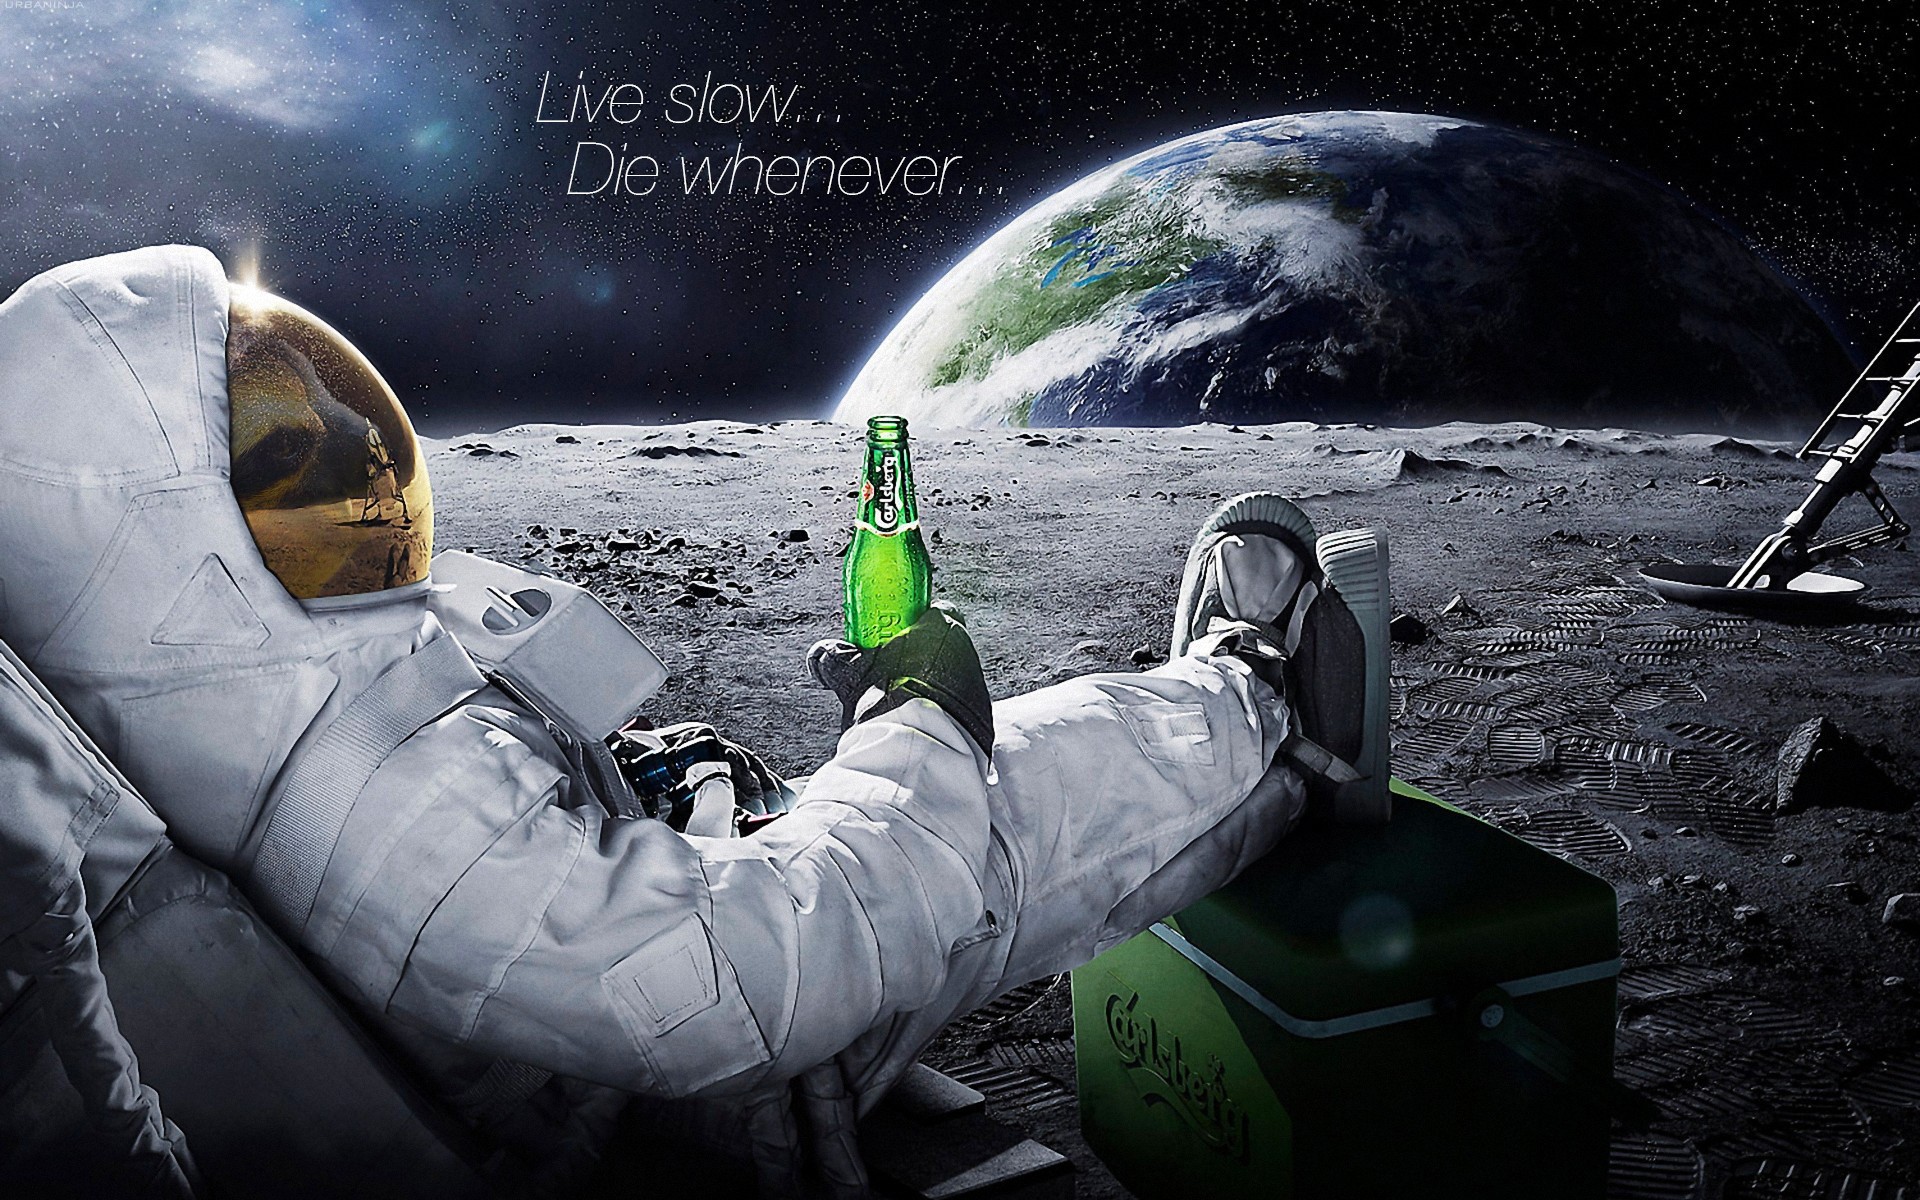 General 1920x1200 Carlsberg typography alcohol Moon digital art beer advertisements Earth astronaut relaxation space bottles sitting